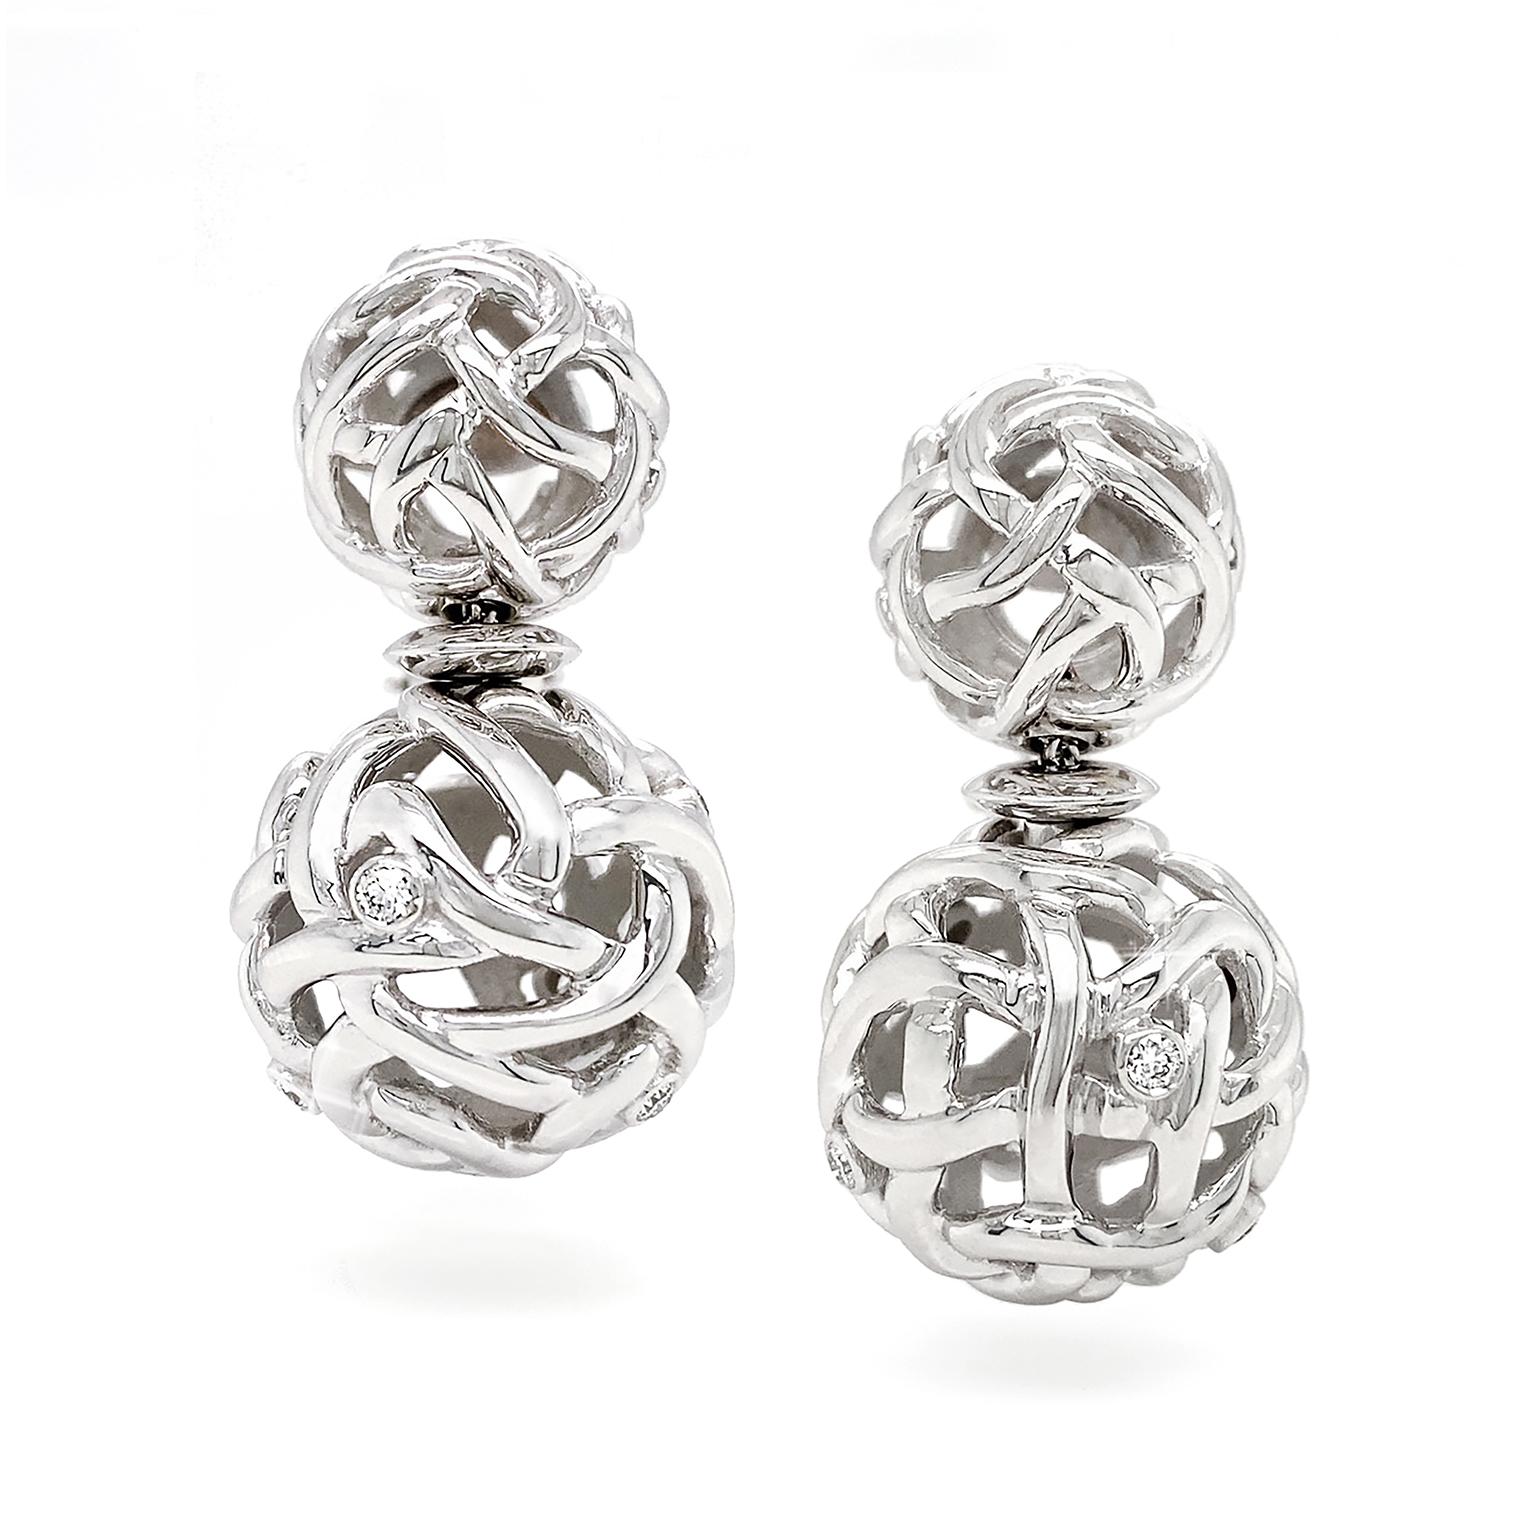 These earrings are an interlaced design of openwork orbs consisting of 18k white gold. On the larger orbs are carefully placed diamonds which bring a luminescent result. A total of 14 brilliant cut diamonds weigh .42 carats. The earrings measure .78